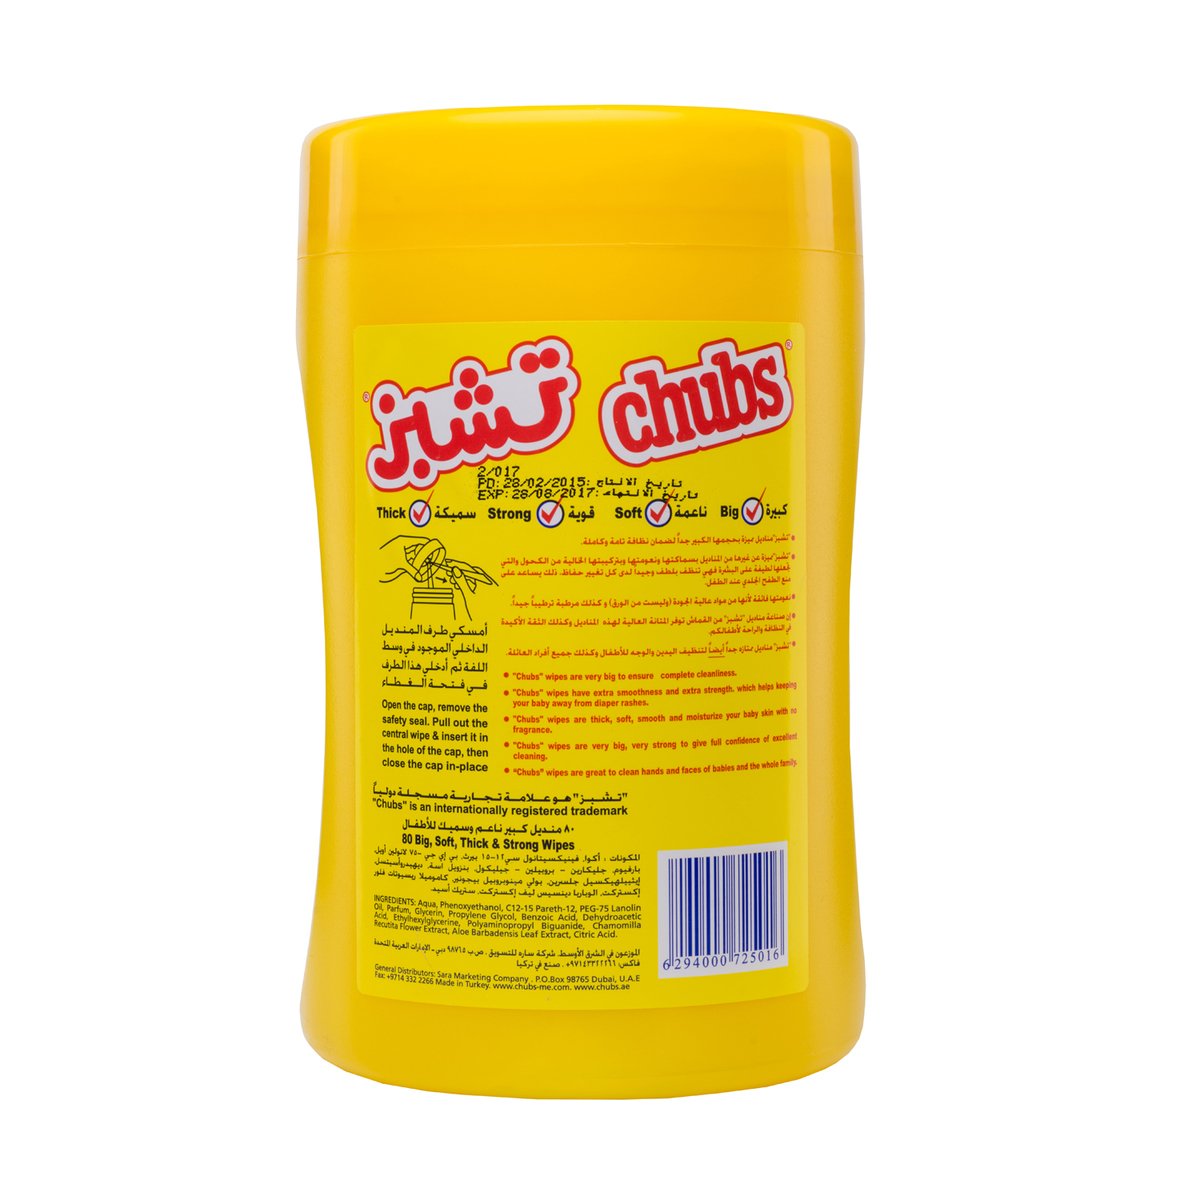 Chubbs Baby Wipes Canister 80pcs